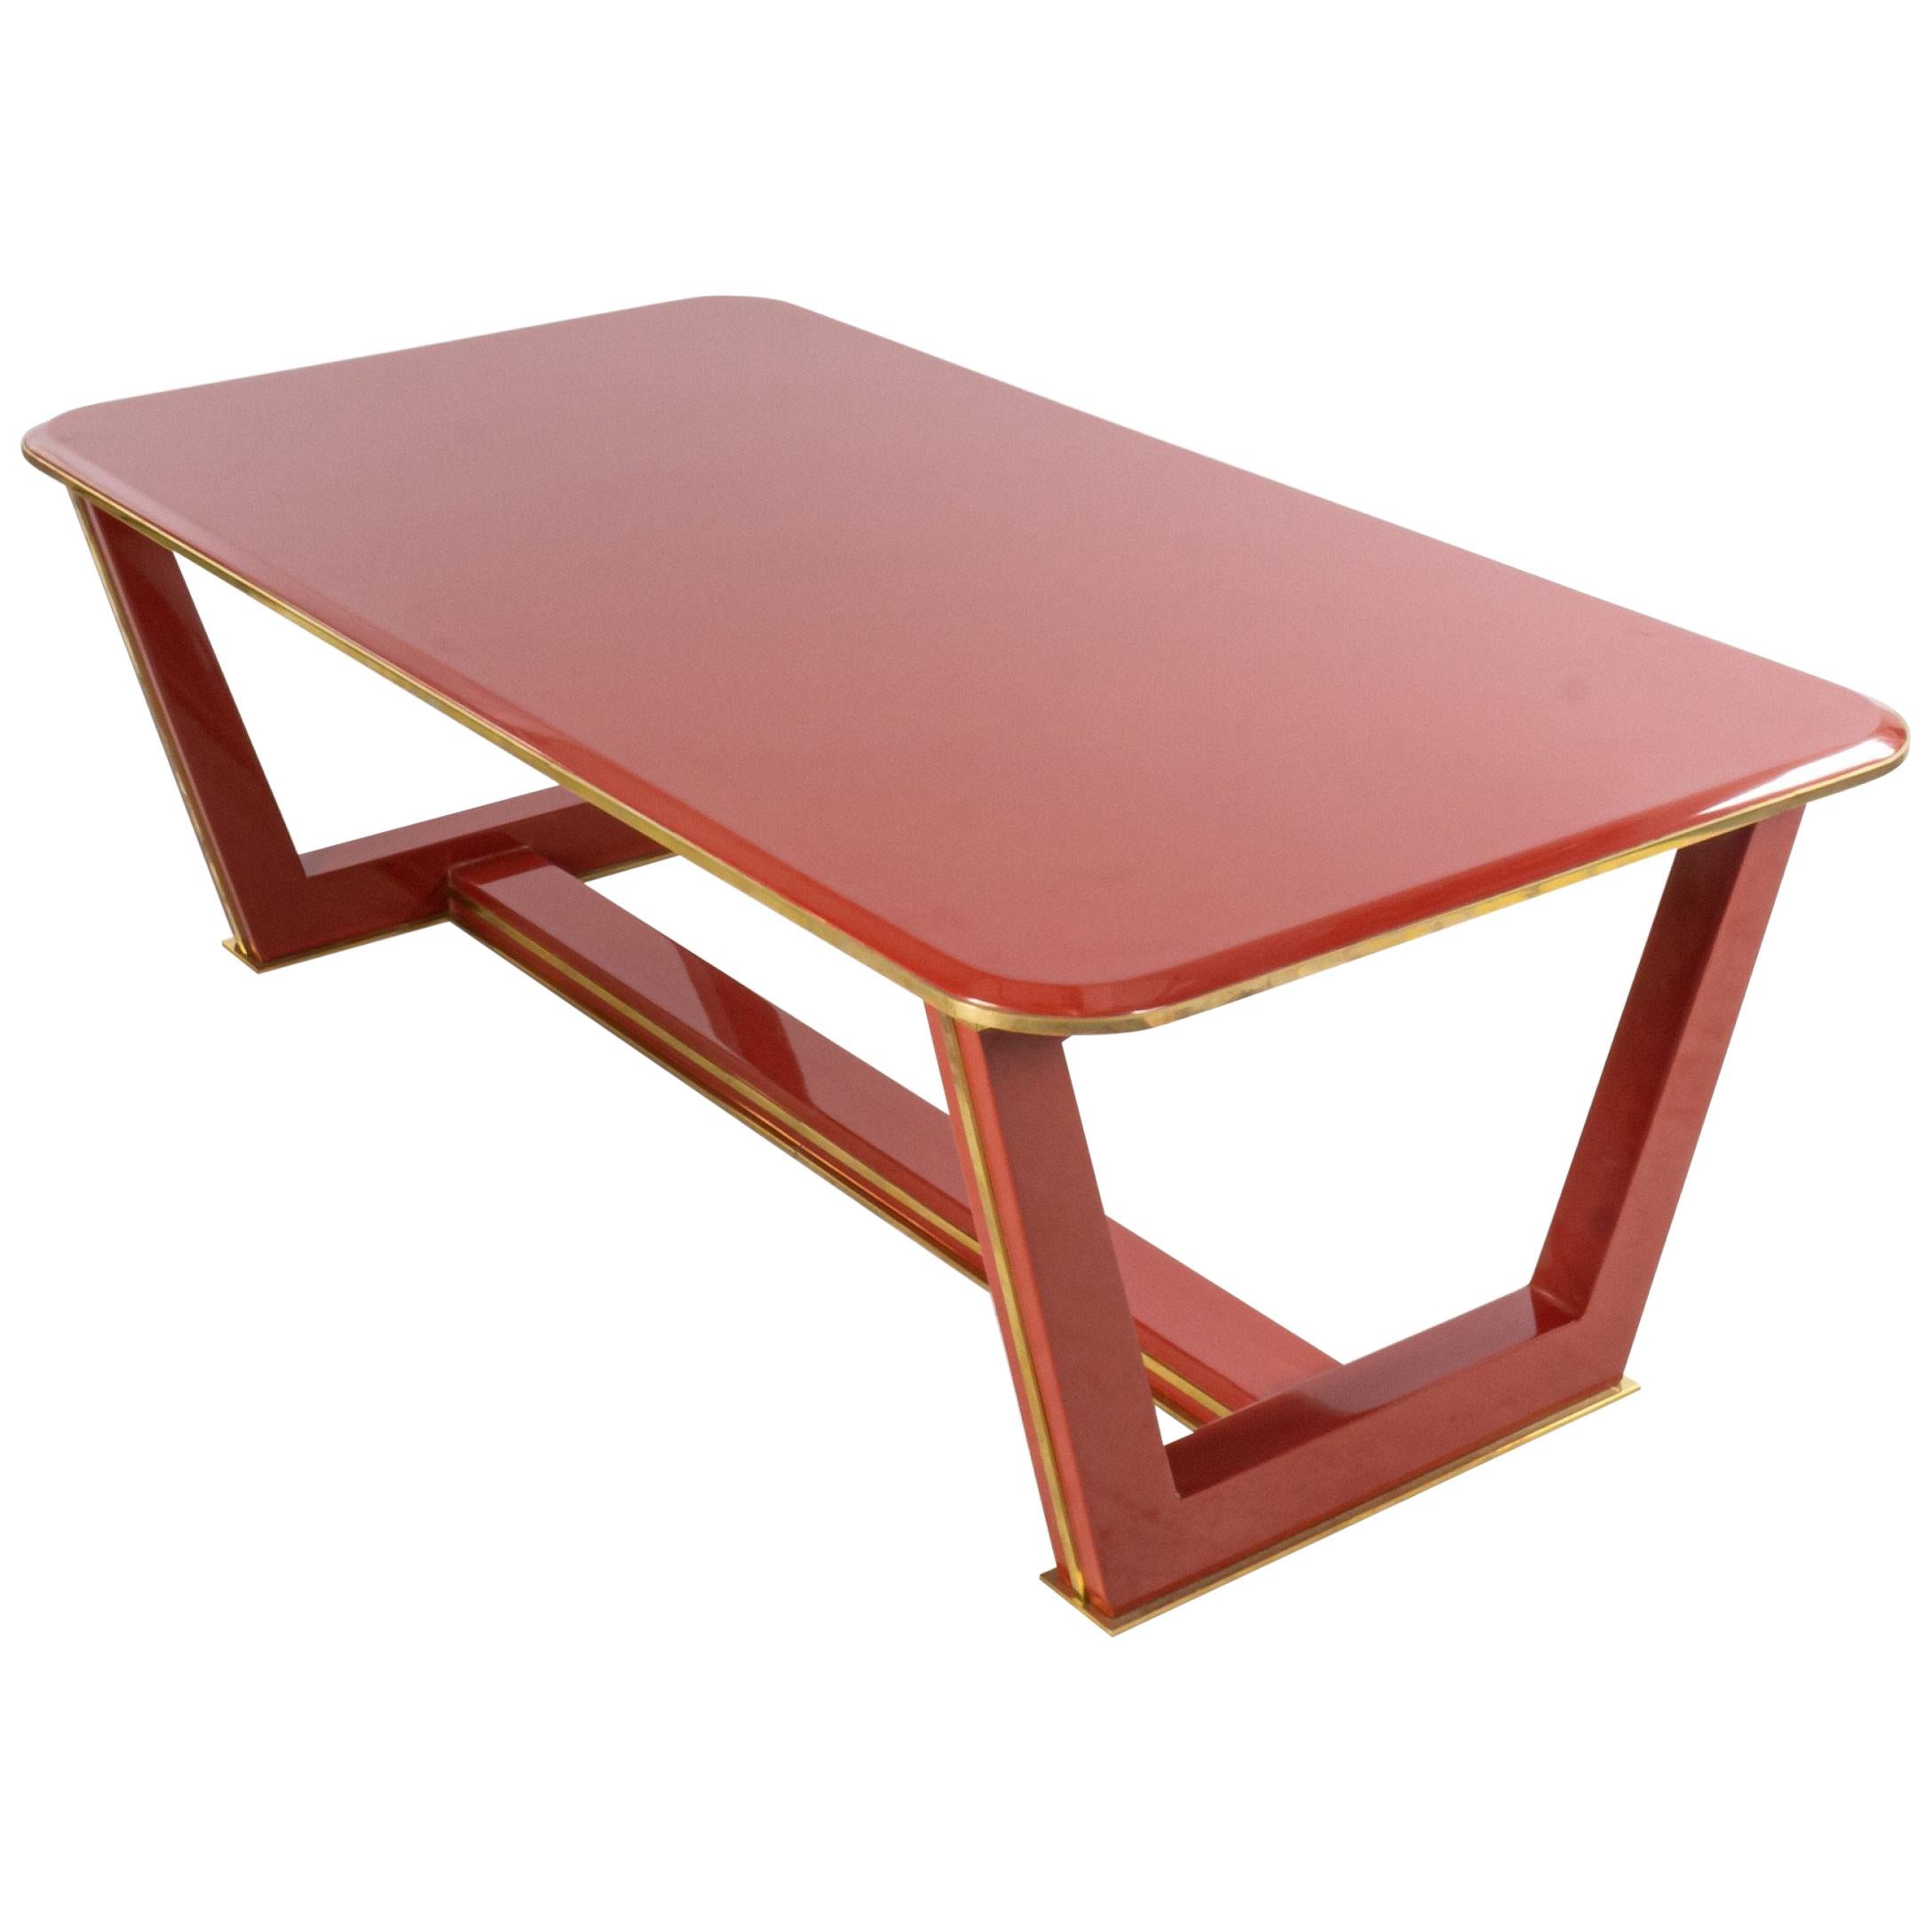 French 1940s Style Red Lacquered Coffee Table